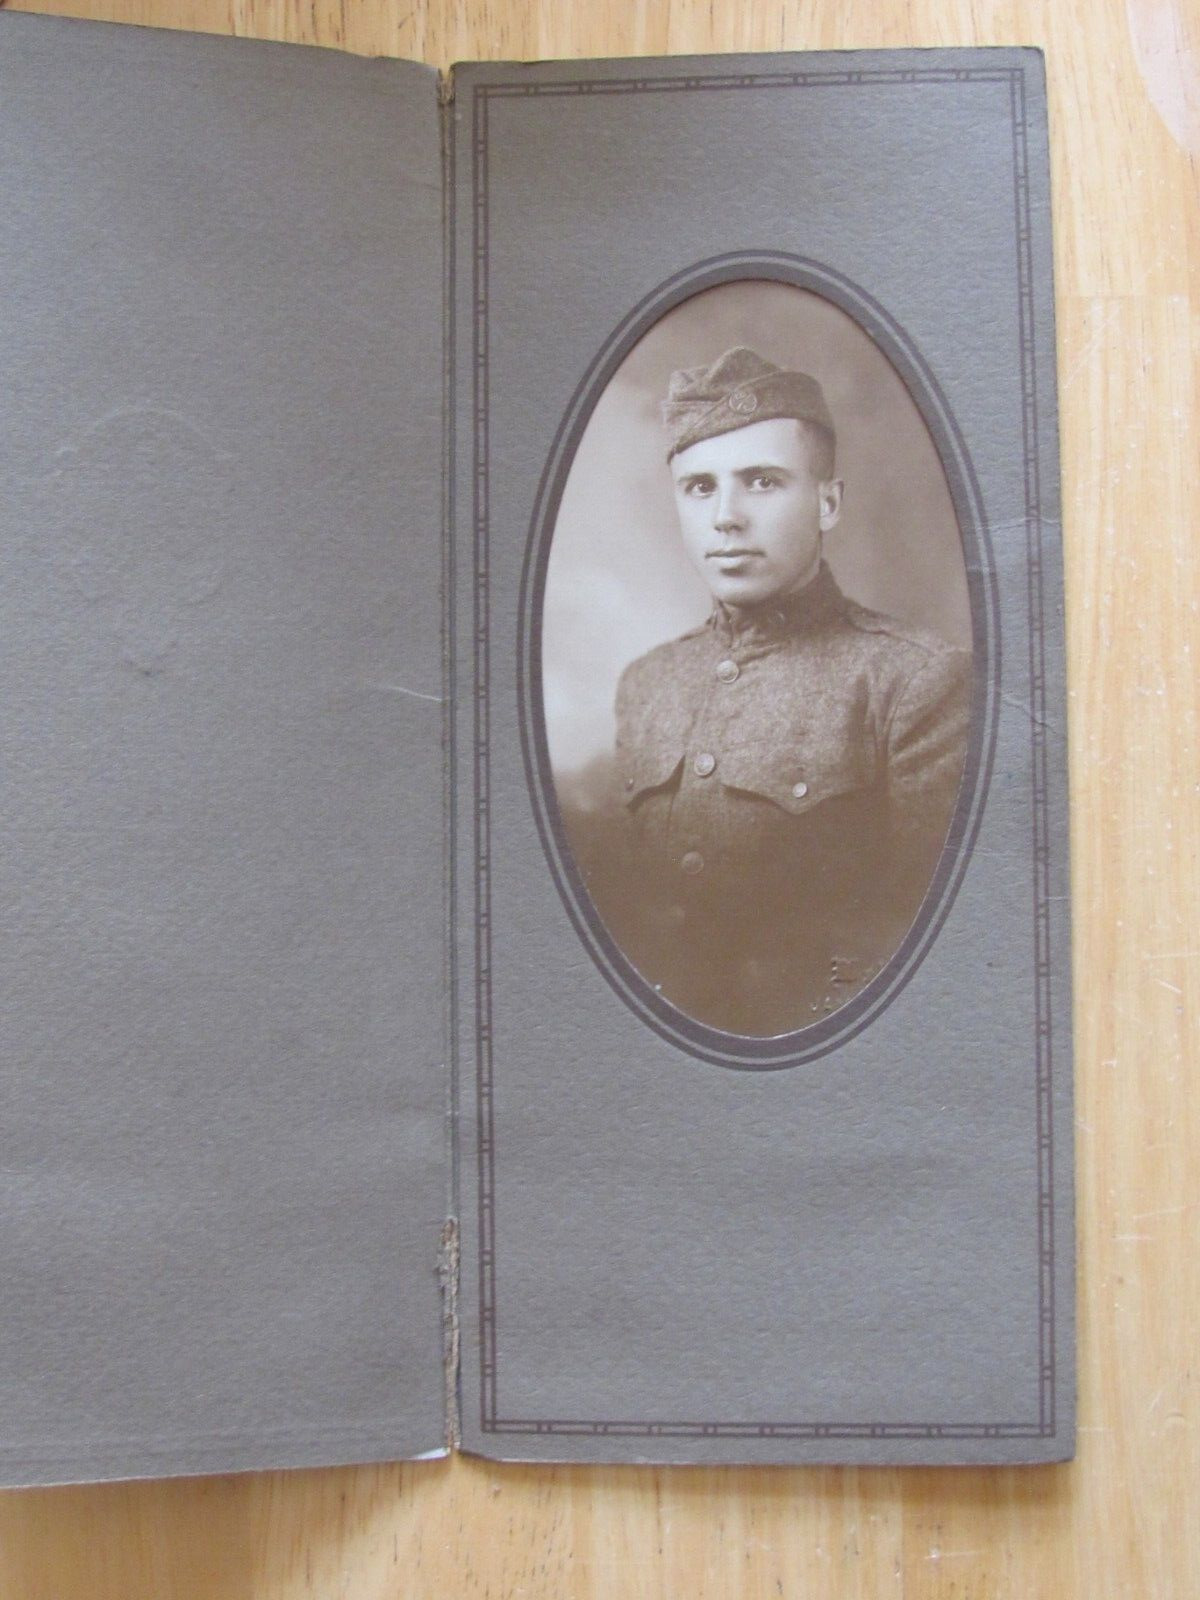 WW1 US SOLDIER PHOTOGRAPH 122 INFANTRY L CO BUTTON TAKEN JAMAICA NY